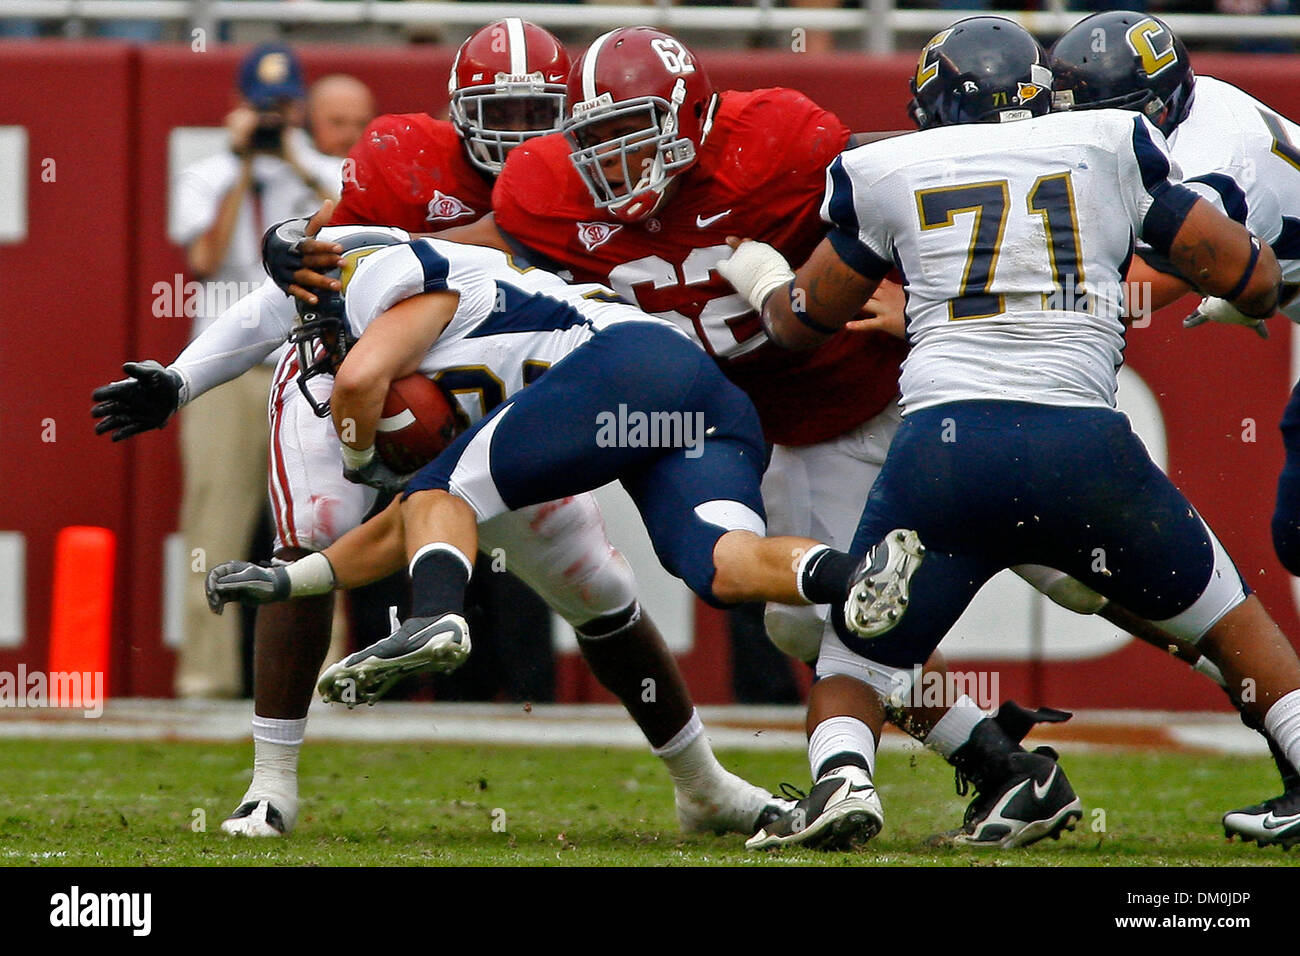 Nov. 21, 2009 - Tuscaloosa, Alabama, U.S - 21November2009: Alabama defensive lineman Terrence Cody #62 makes a tackle during the first half of play of the NCAA football game between the CRIMSON TIDE and the UNIVERSITY of TENNESSEE at CHATTANOOGA played at Bryant-Denny Stadium in Tuscaloosa, Alabama. The UNIVERSITY of ALABAMA beat the UNIVERSITY of TENNESSEE at CHATTANOOGA 45-0. (Cr Stock Photo